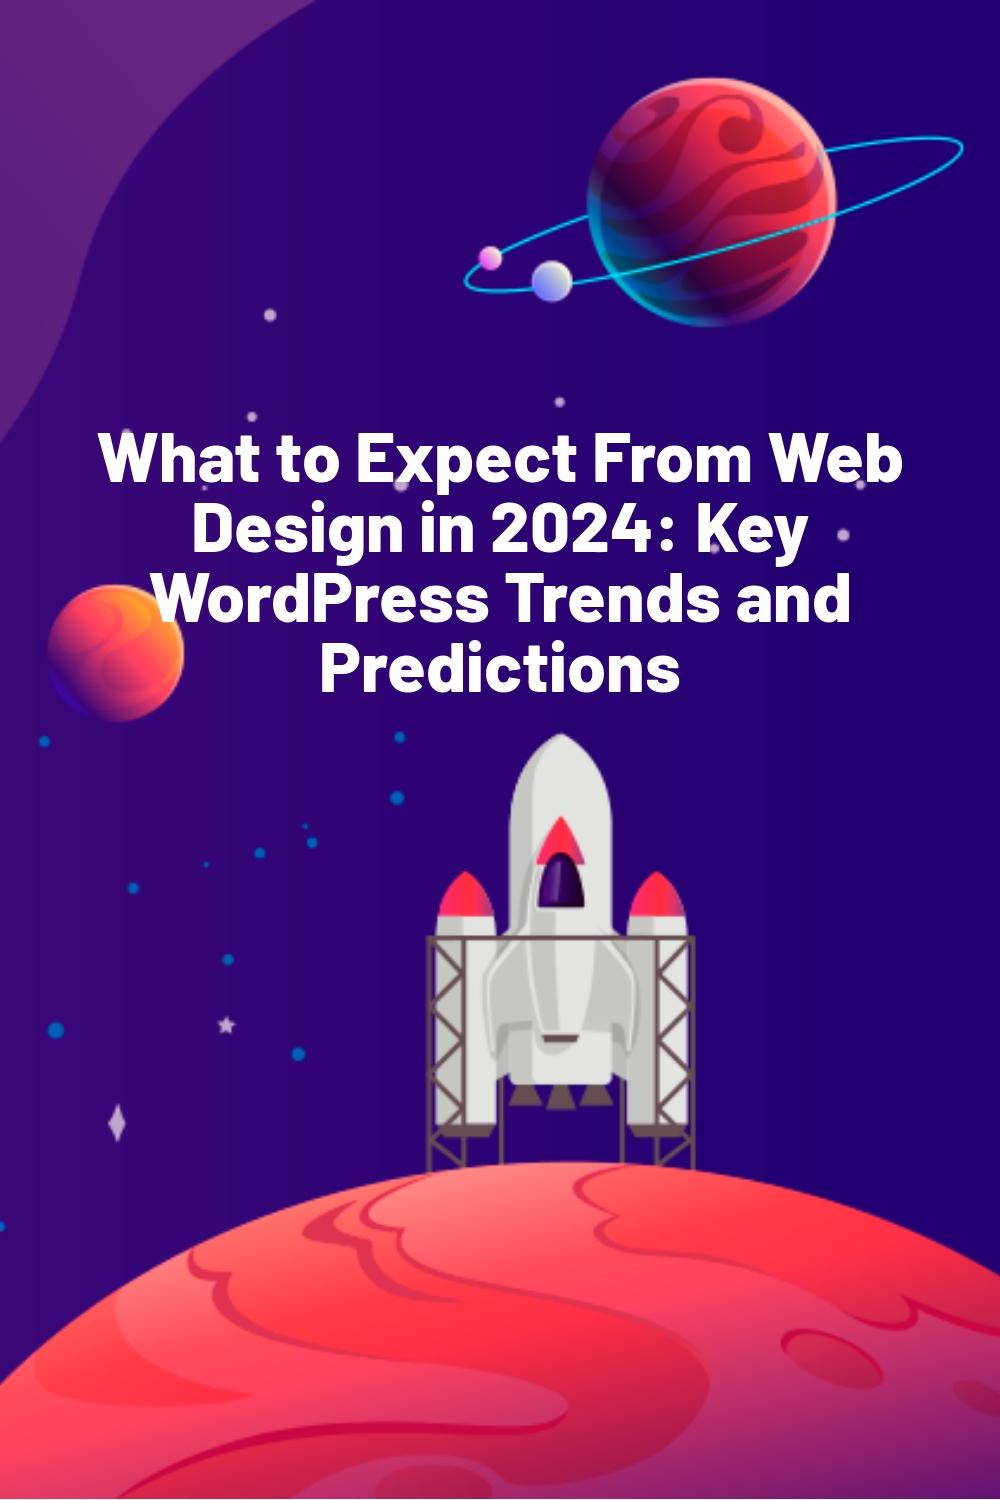 What to Expect From Web Design in 2024: Key WordPress Trends and Predictions